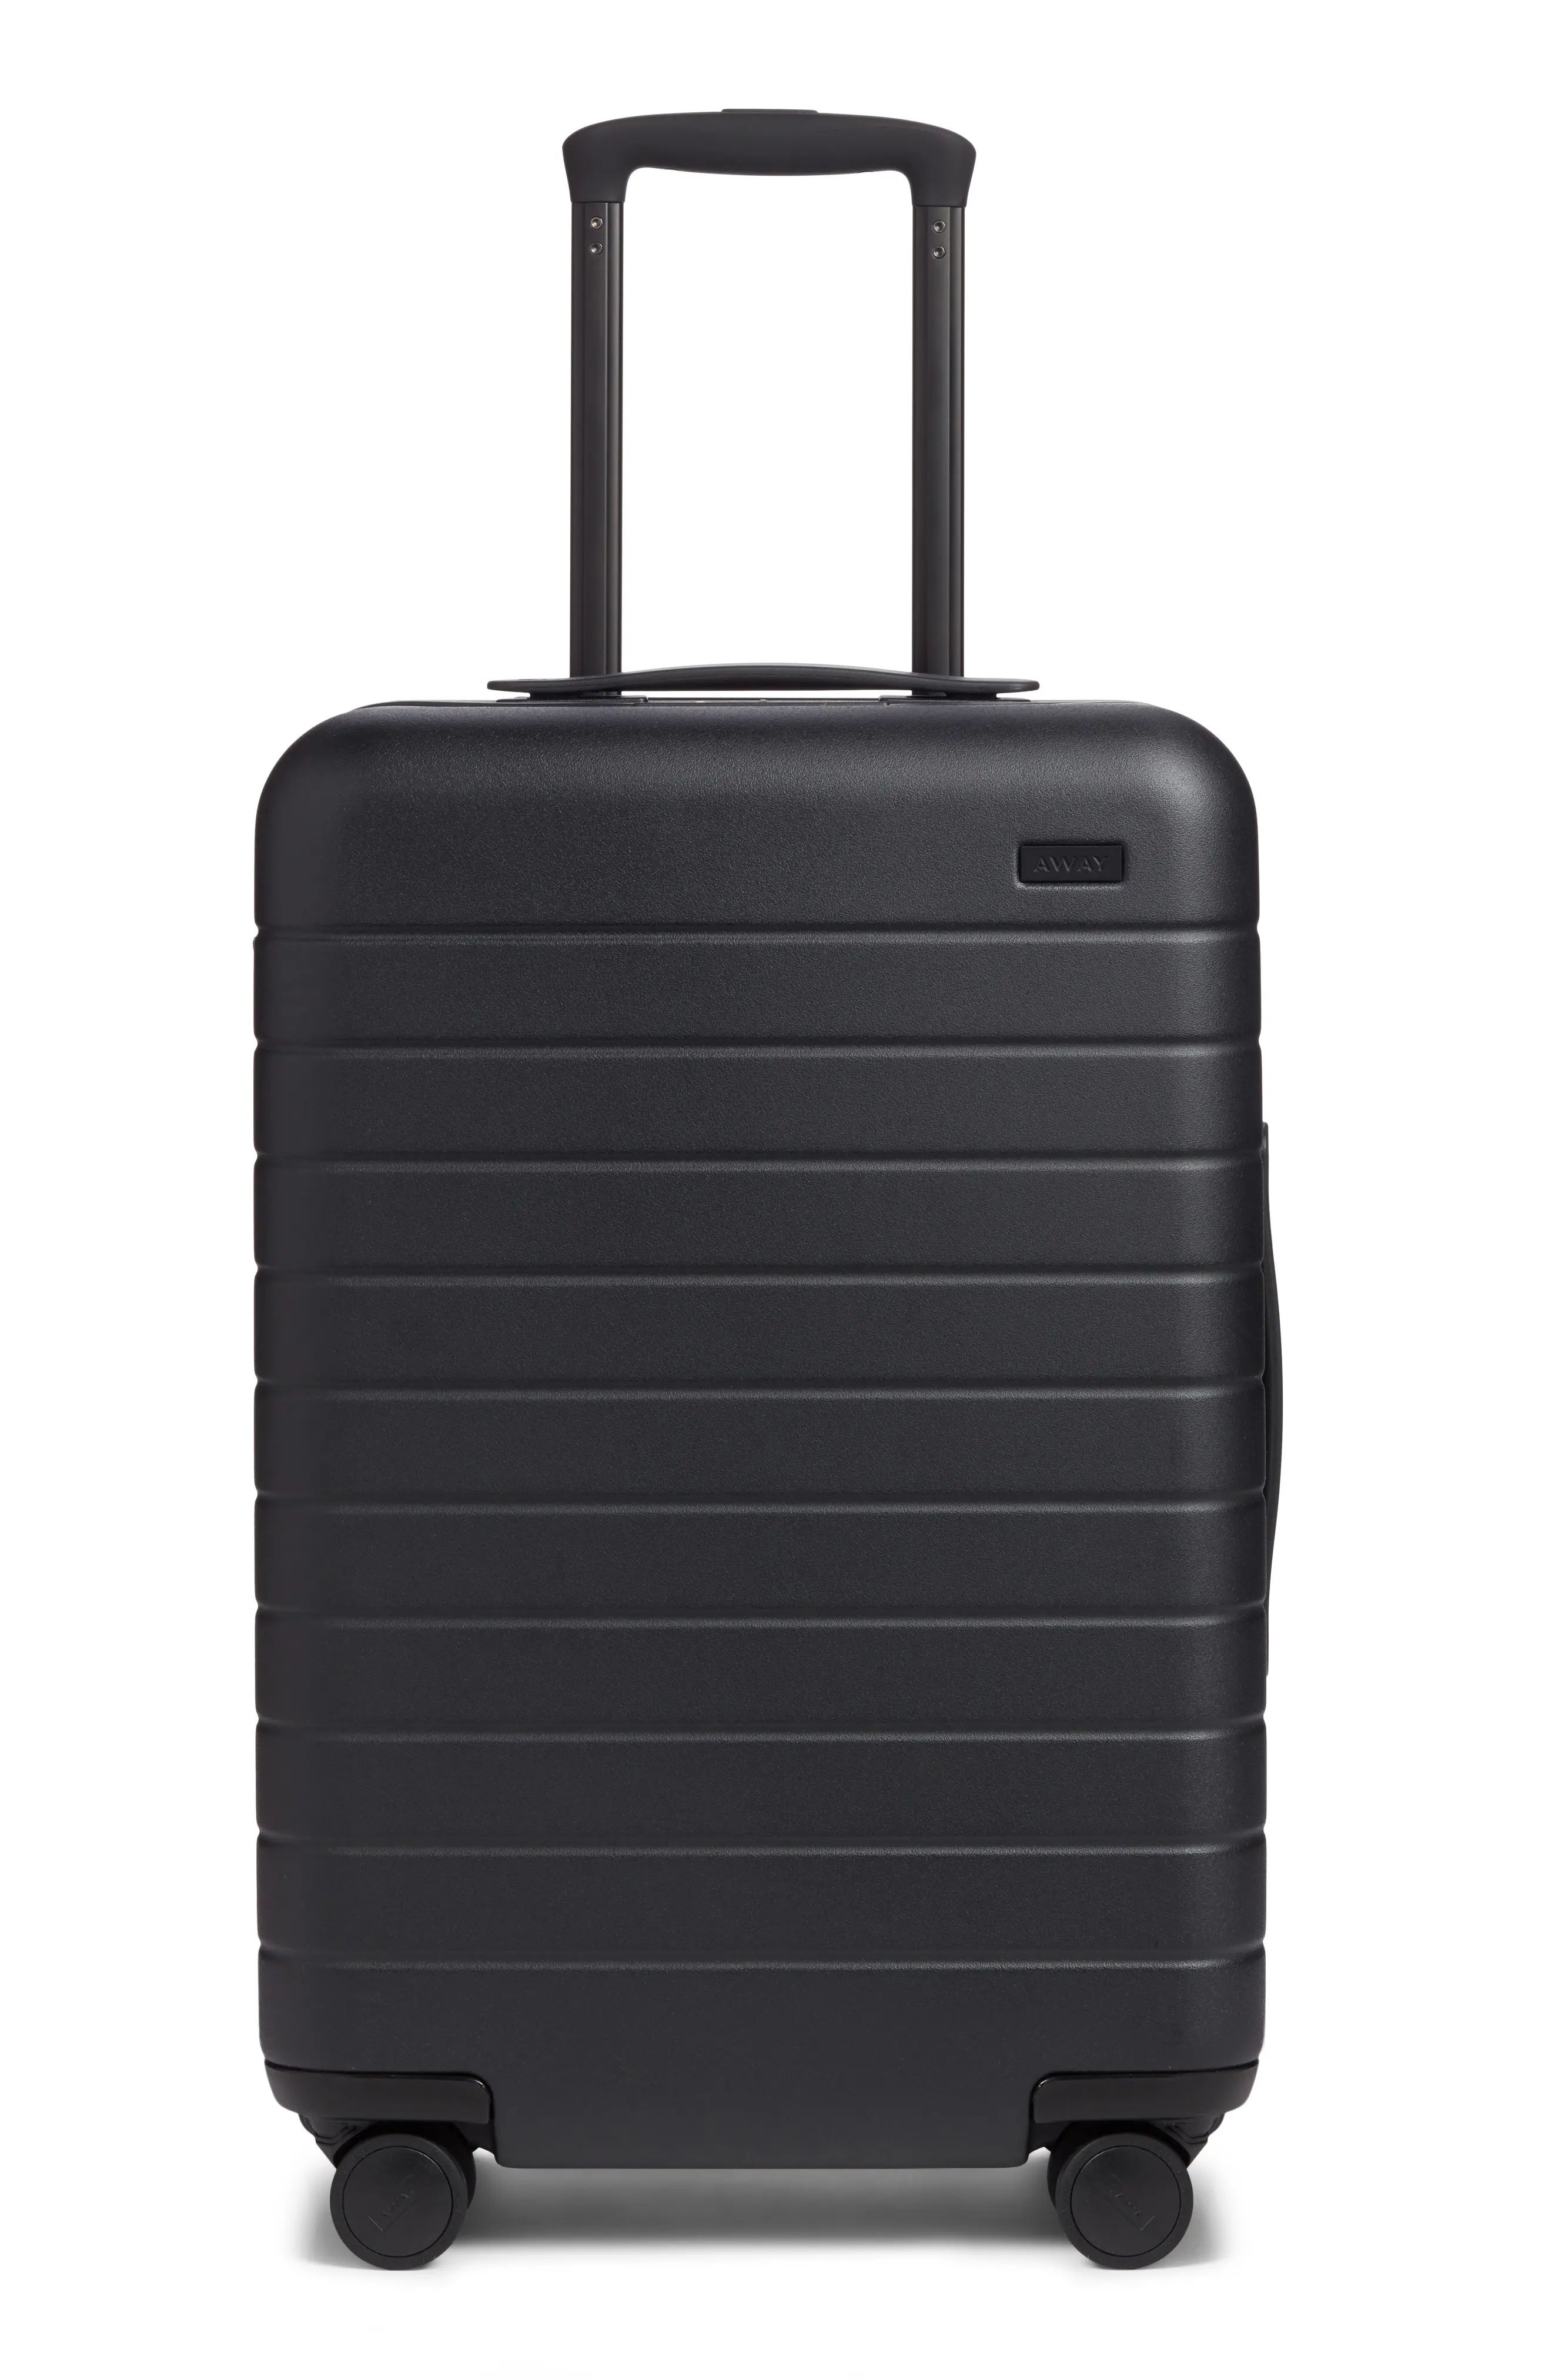 Away The Bigger Carry-On Suitcase - Black | Nordstrom